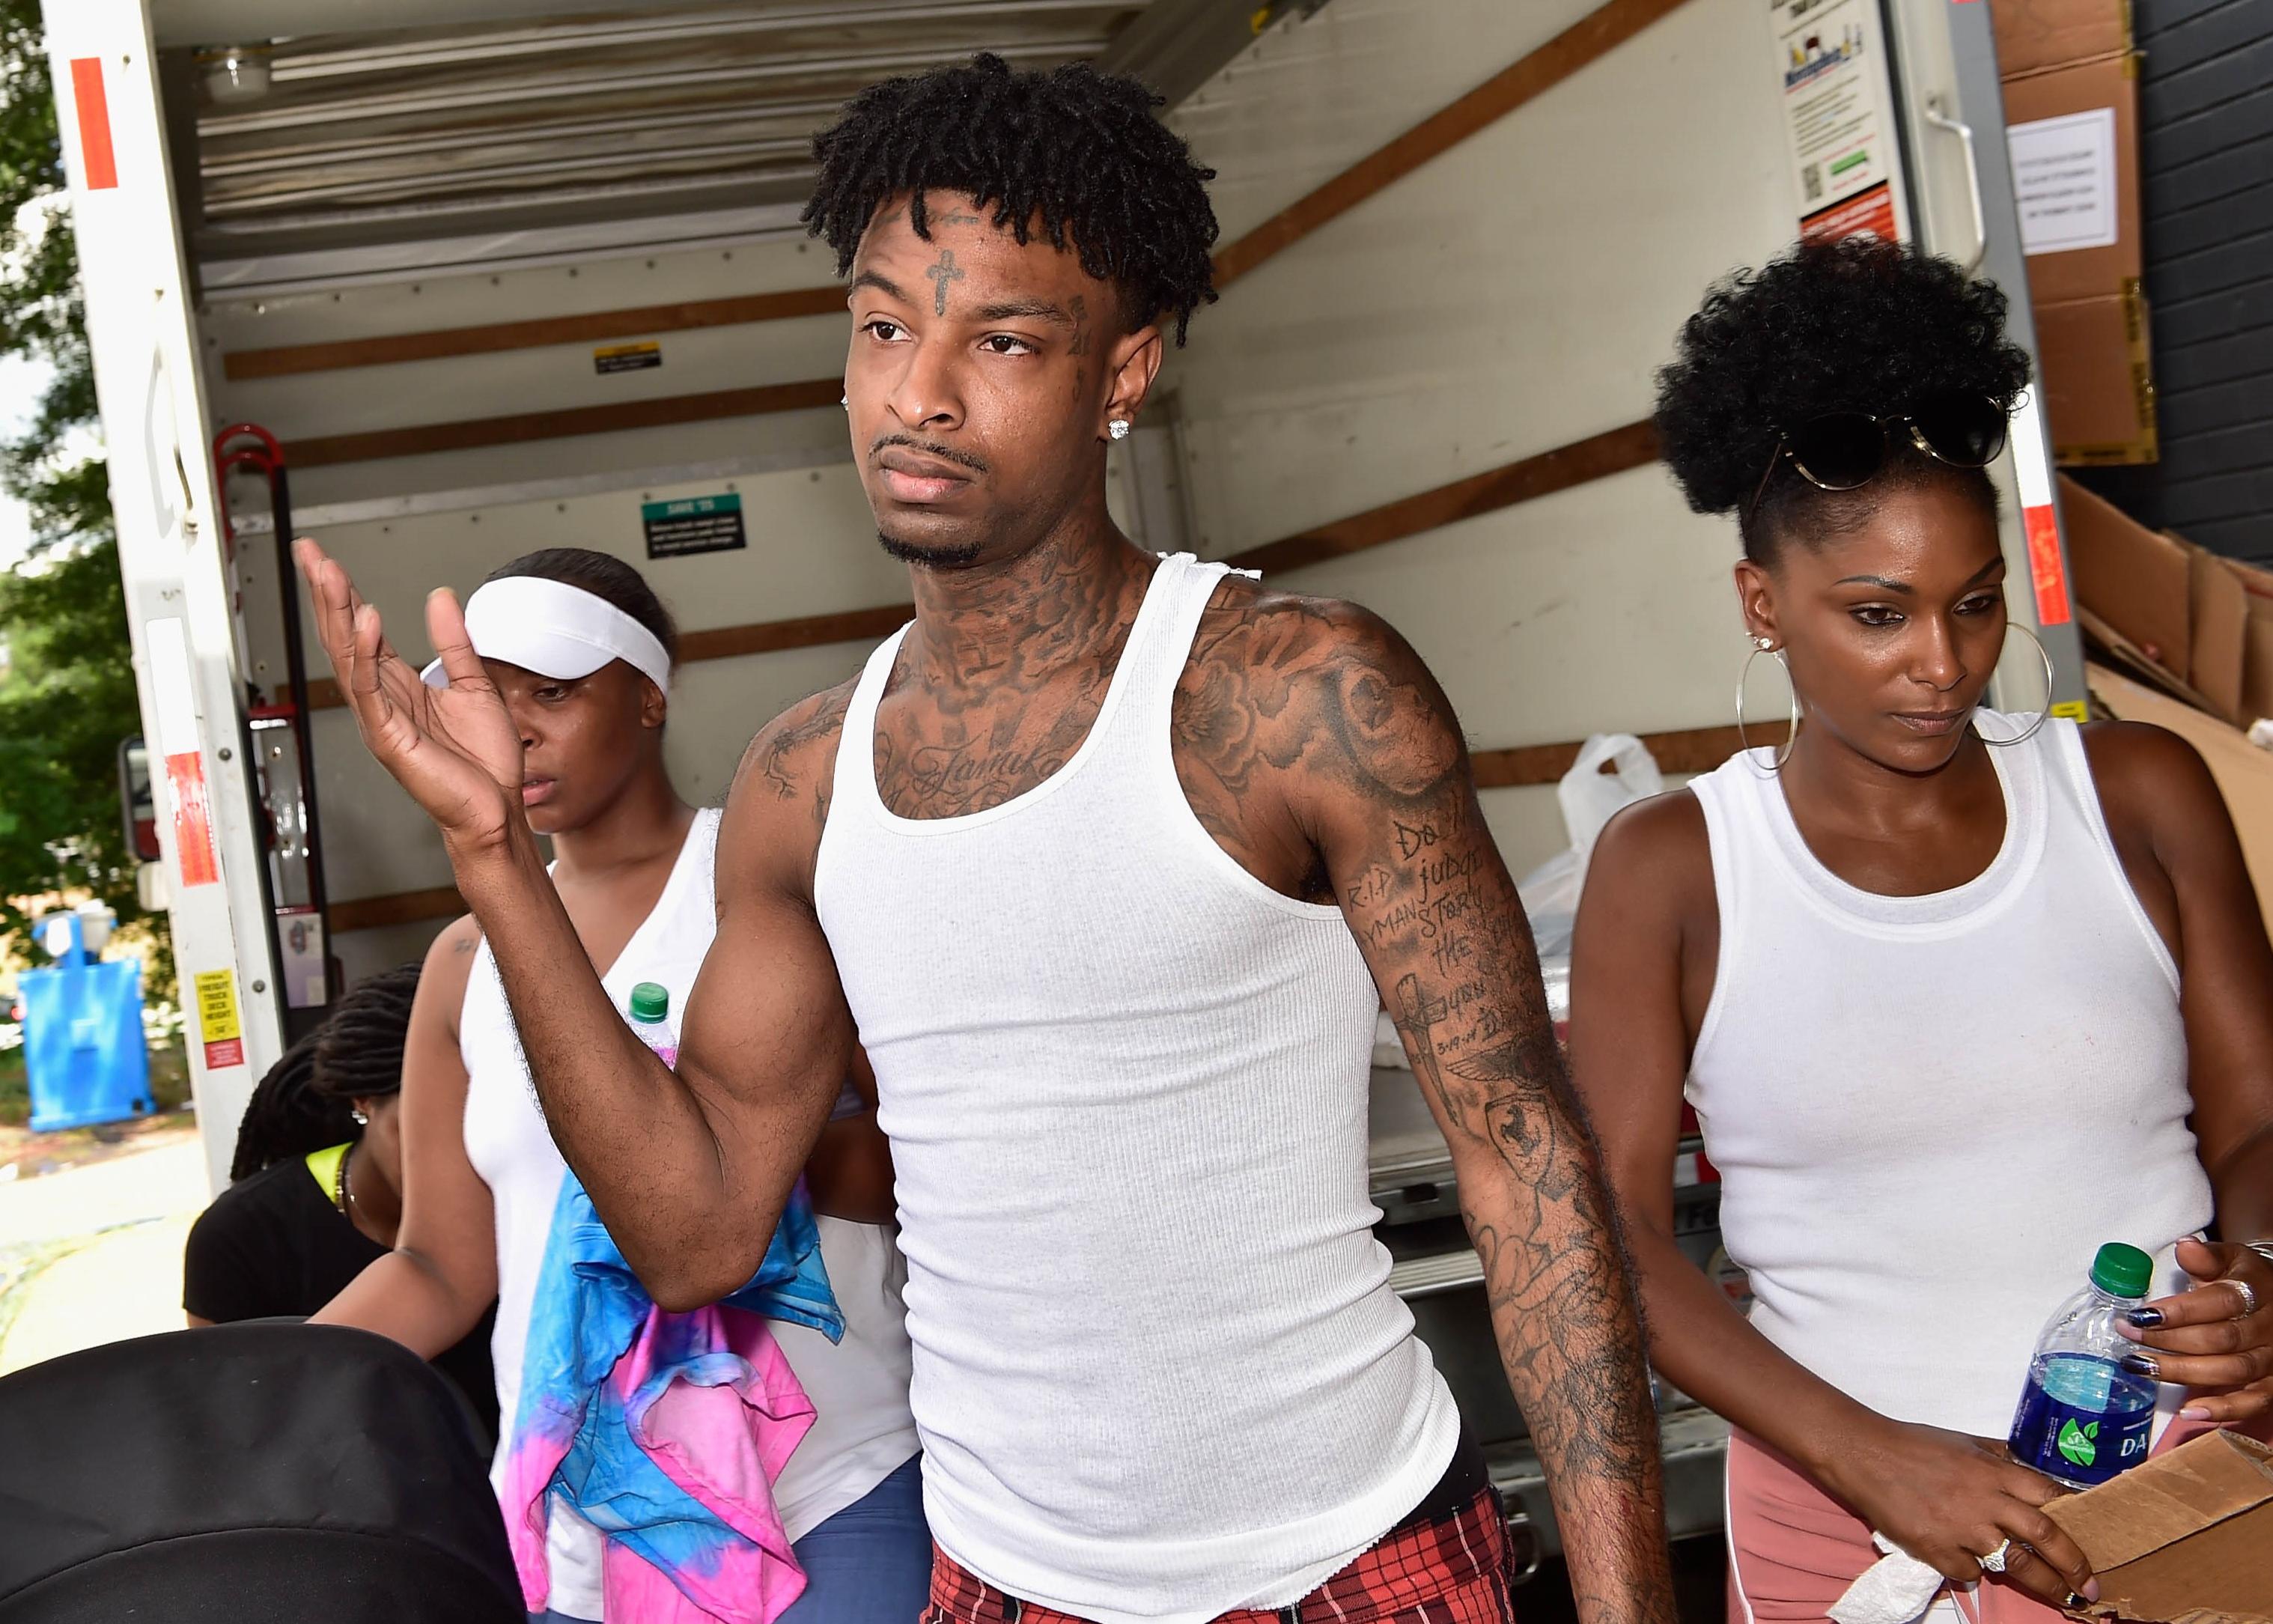 21 Savage provides more than 2,500 DeKalb County school kids with free